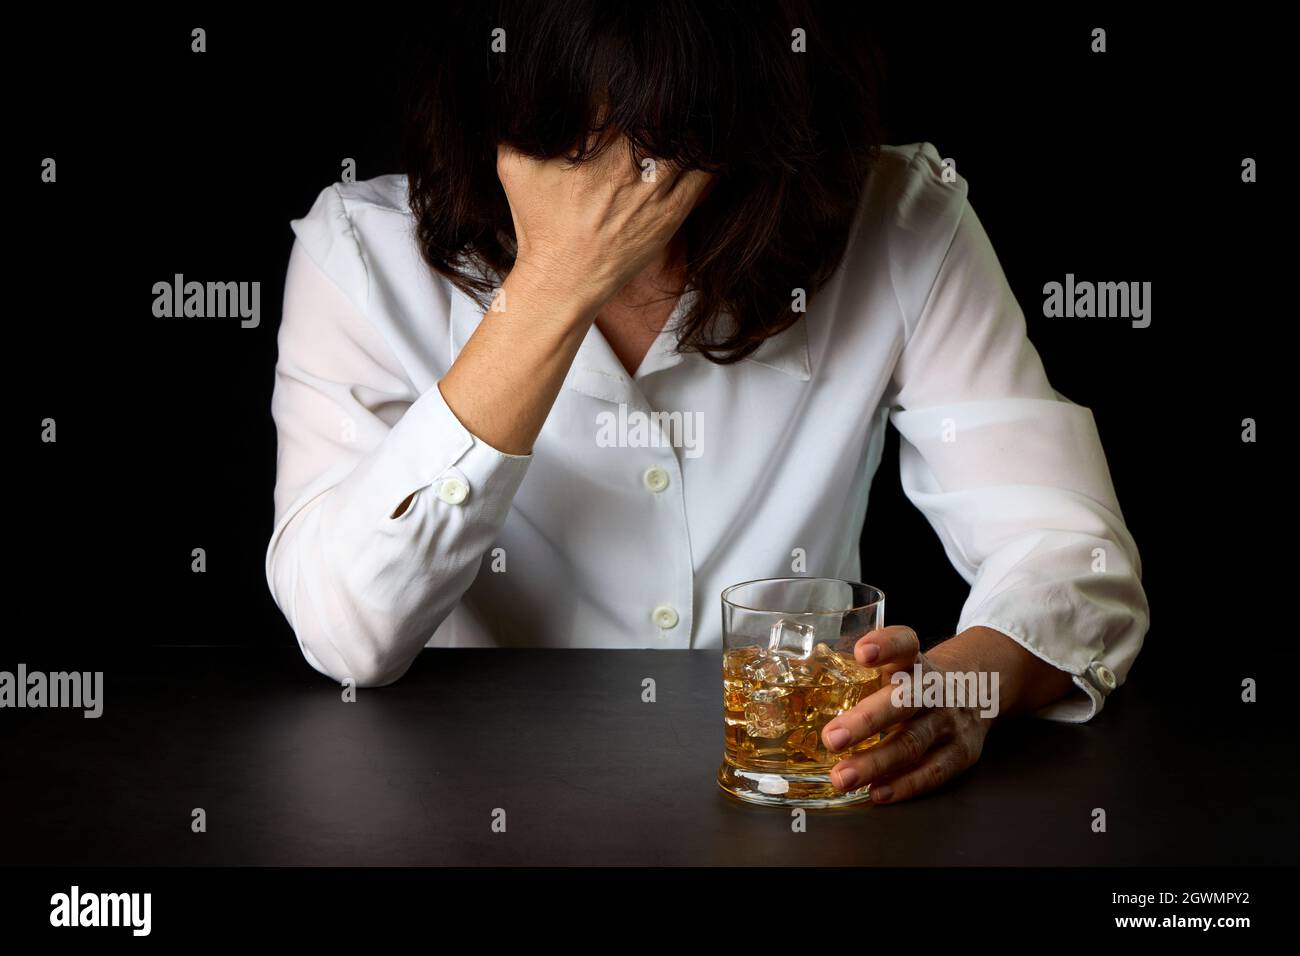 Woman Who Has Abused Alcohol With A Glass Of Scotch And Ice. Concept Of Social Problems Stock Photo